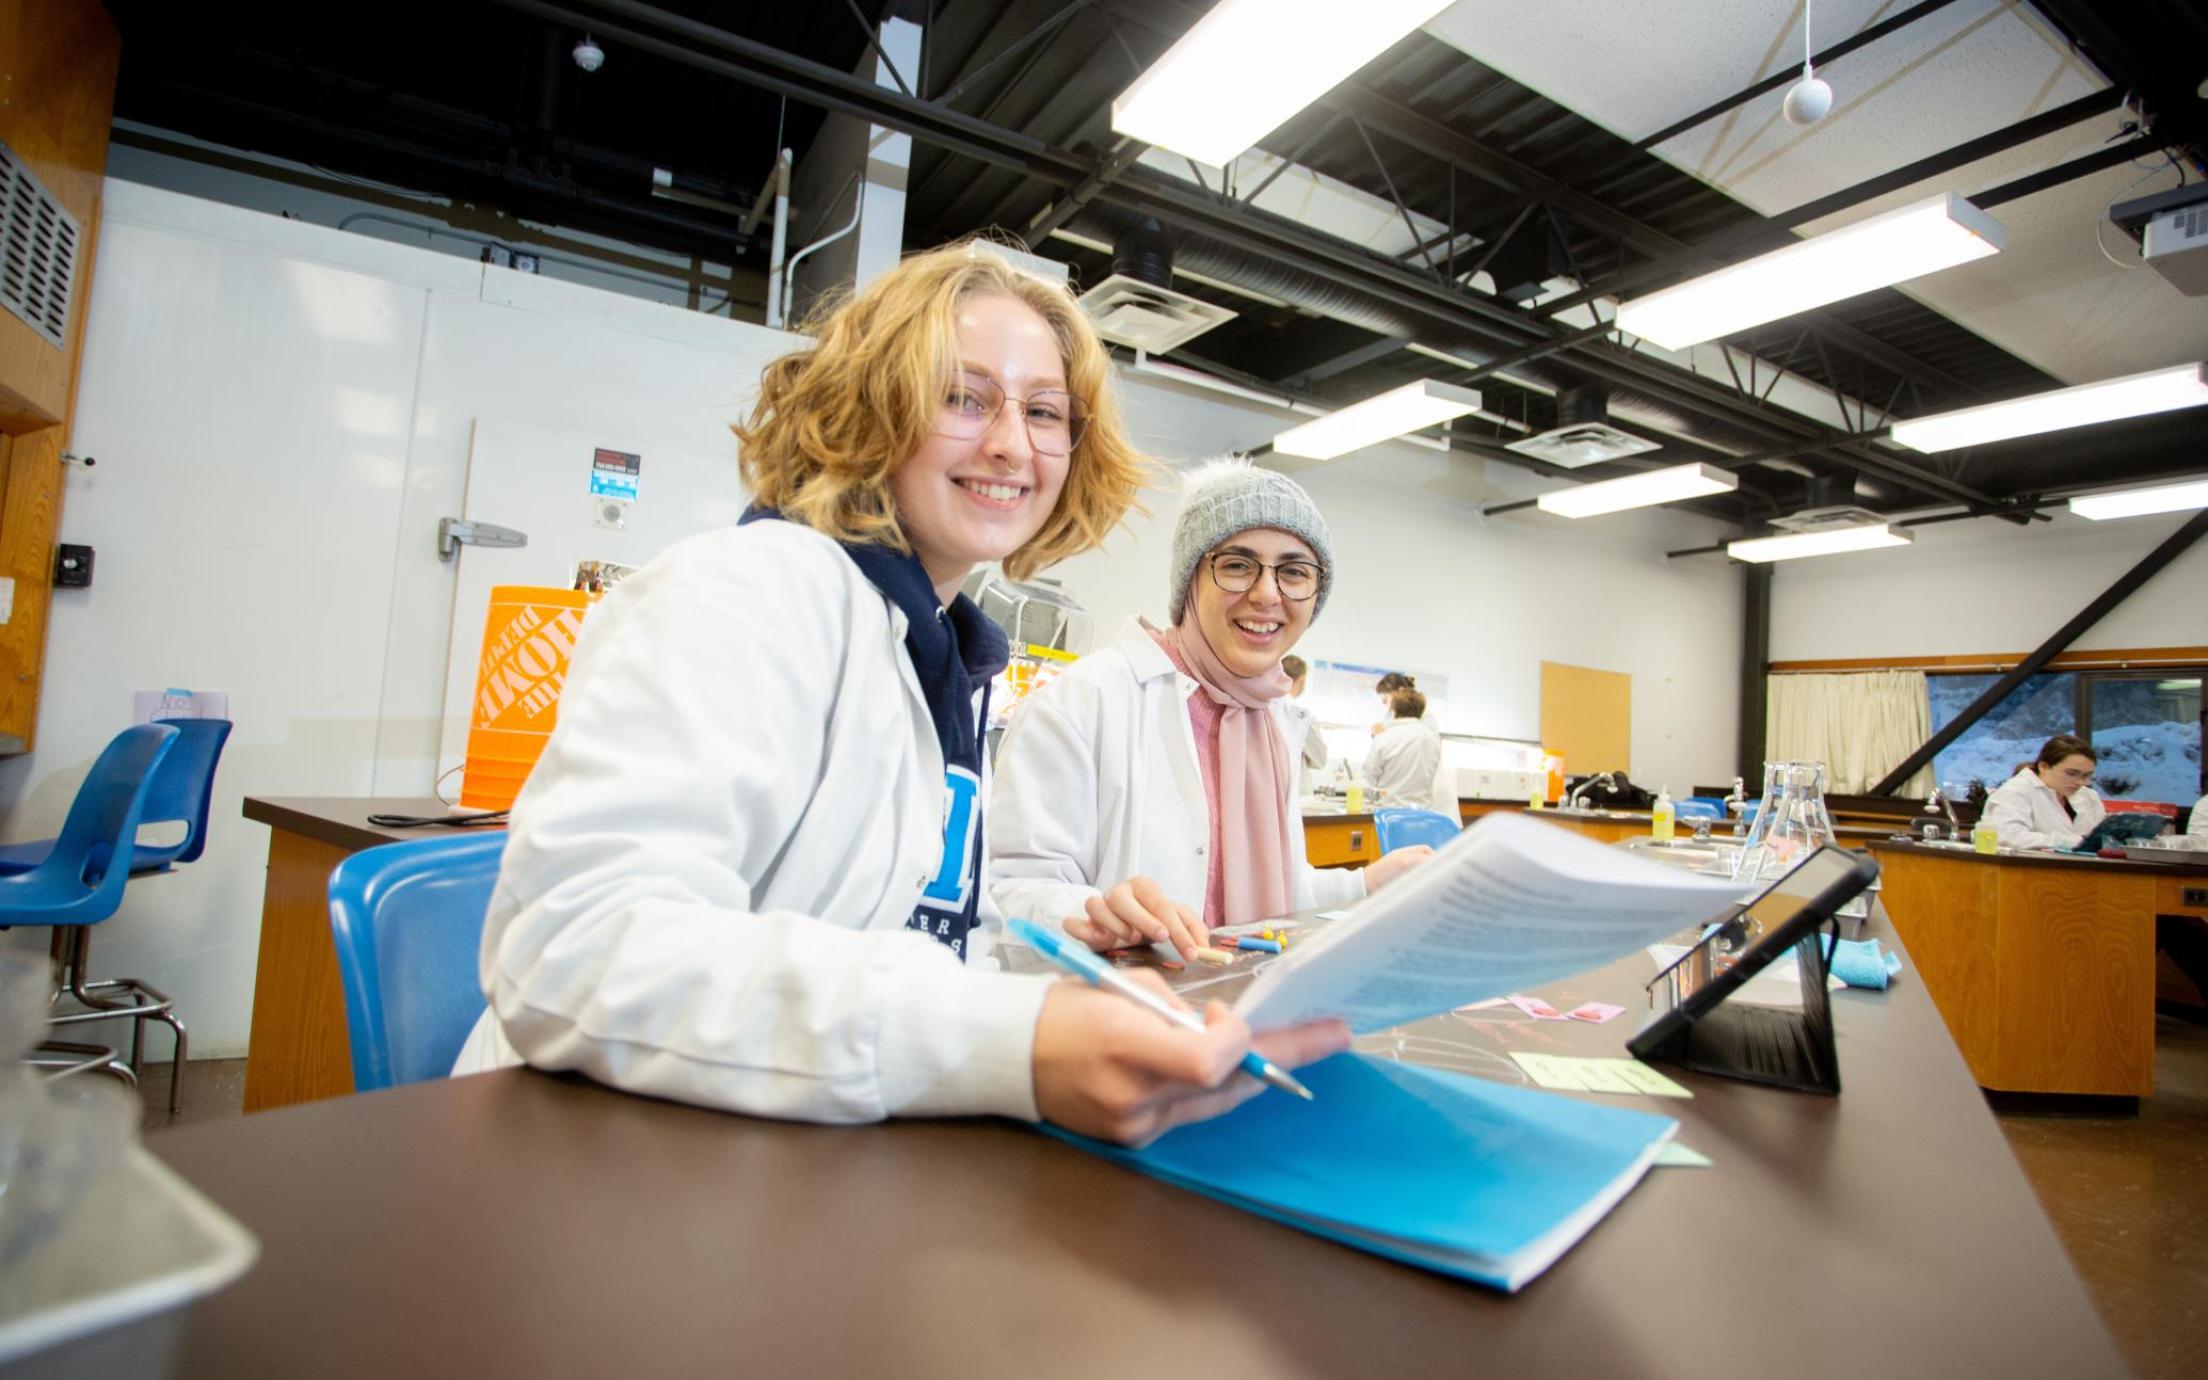 Two students look at a sheet in a lab, one has a pen in her hand, they are both smiling at the camera